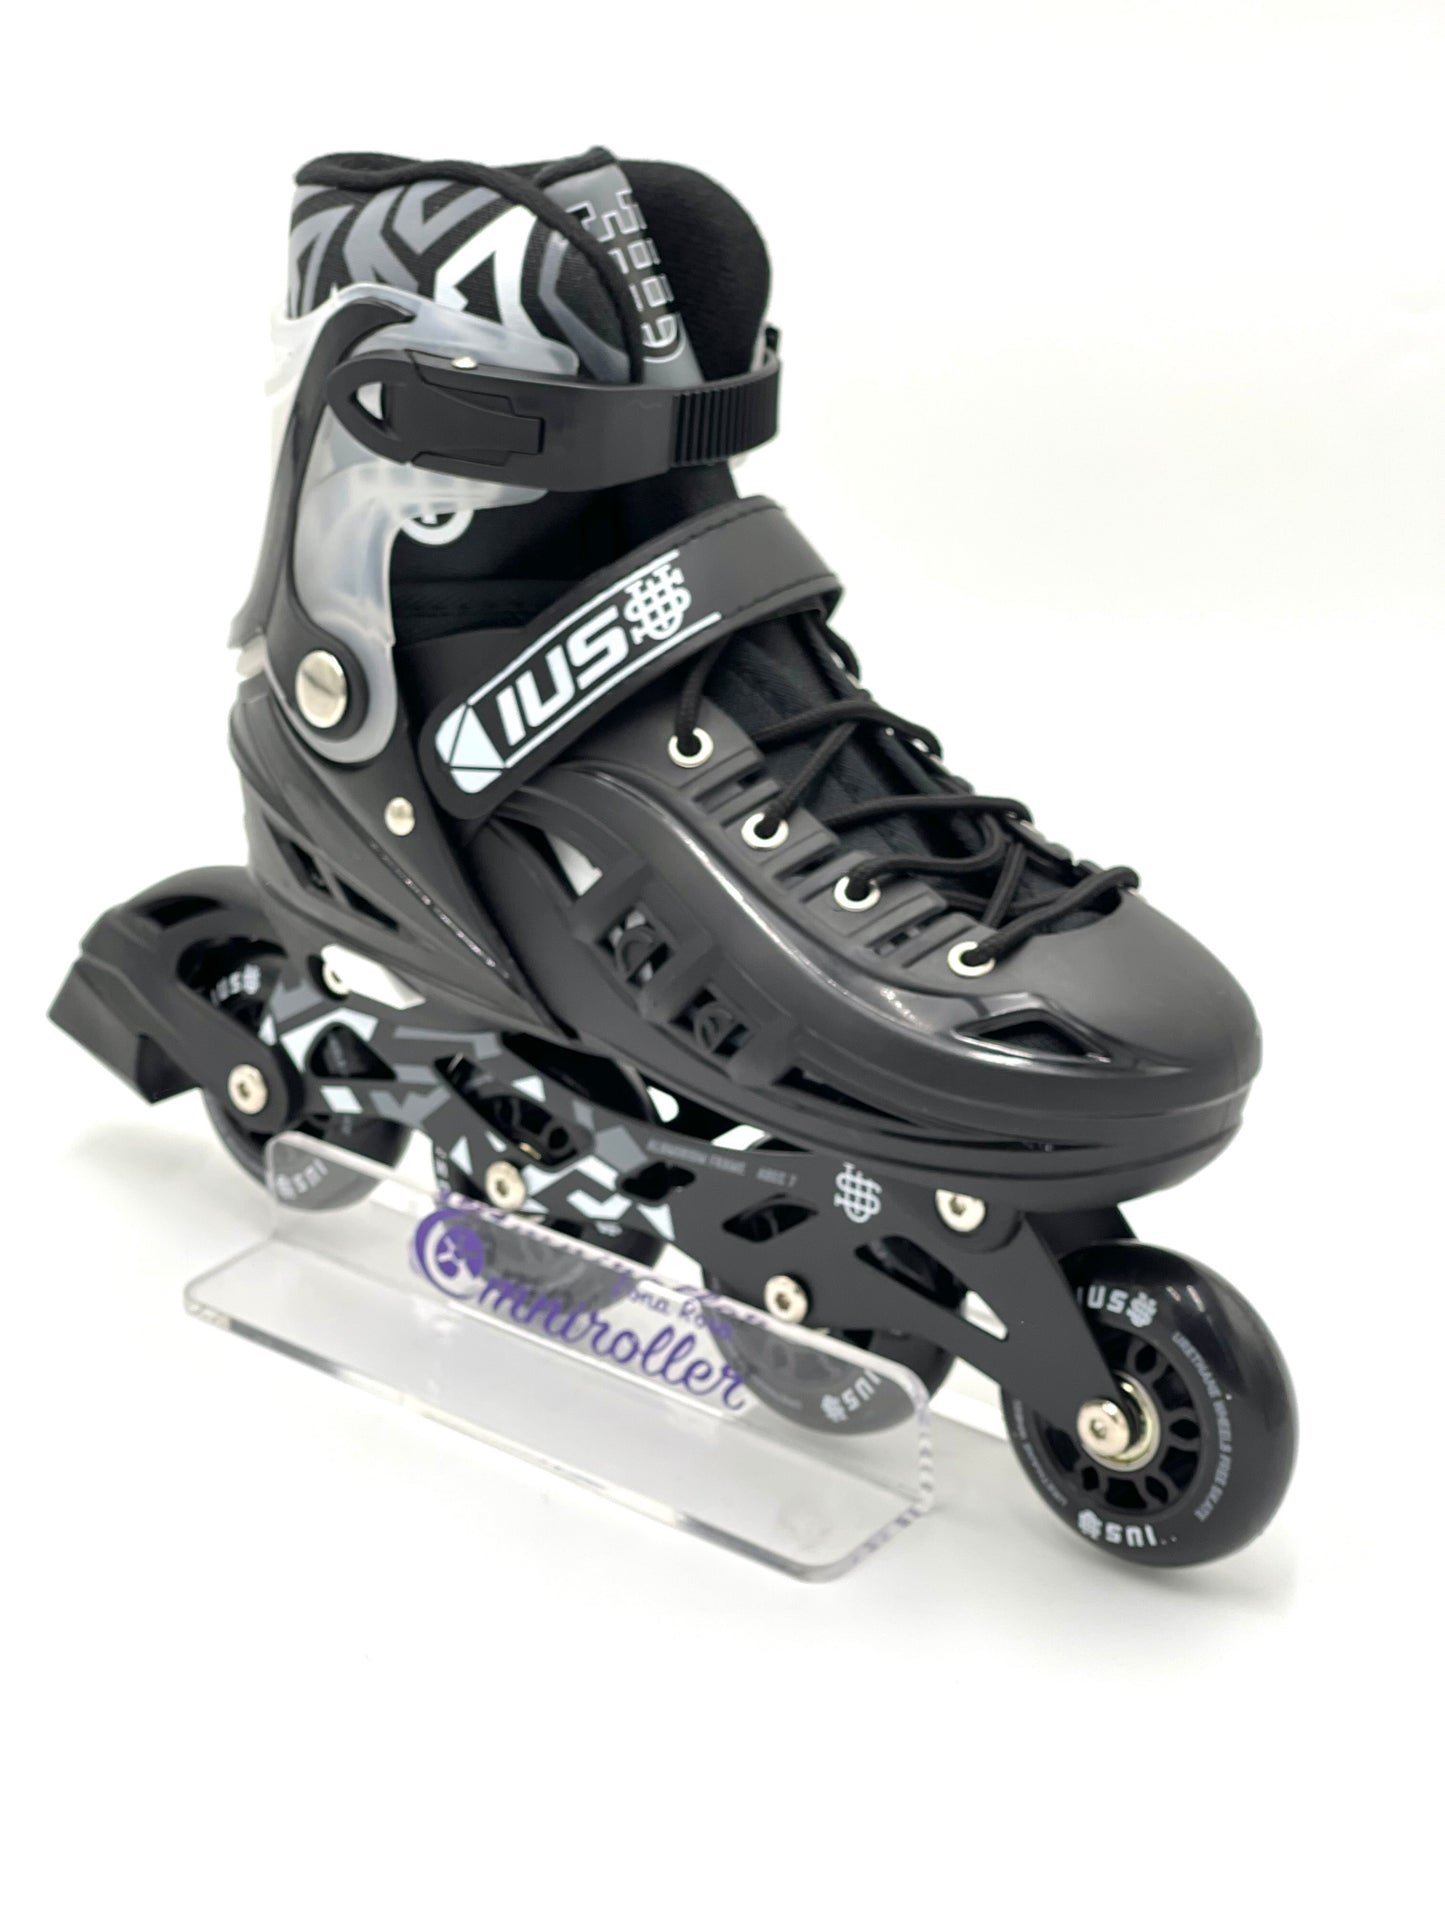 Adjustable Fitness Skate Kit with IUS Black Protections